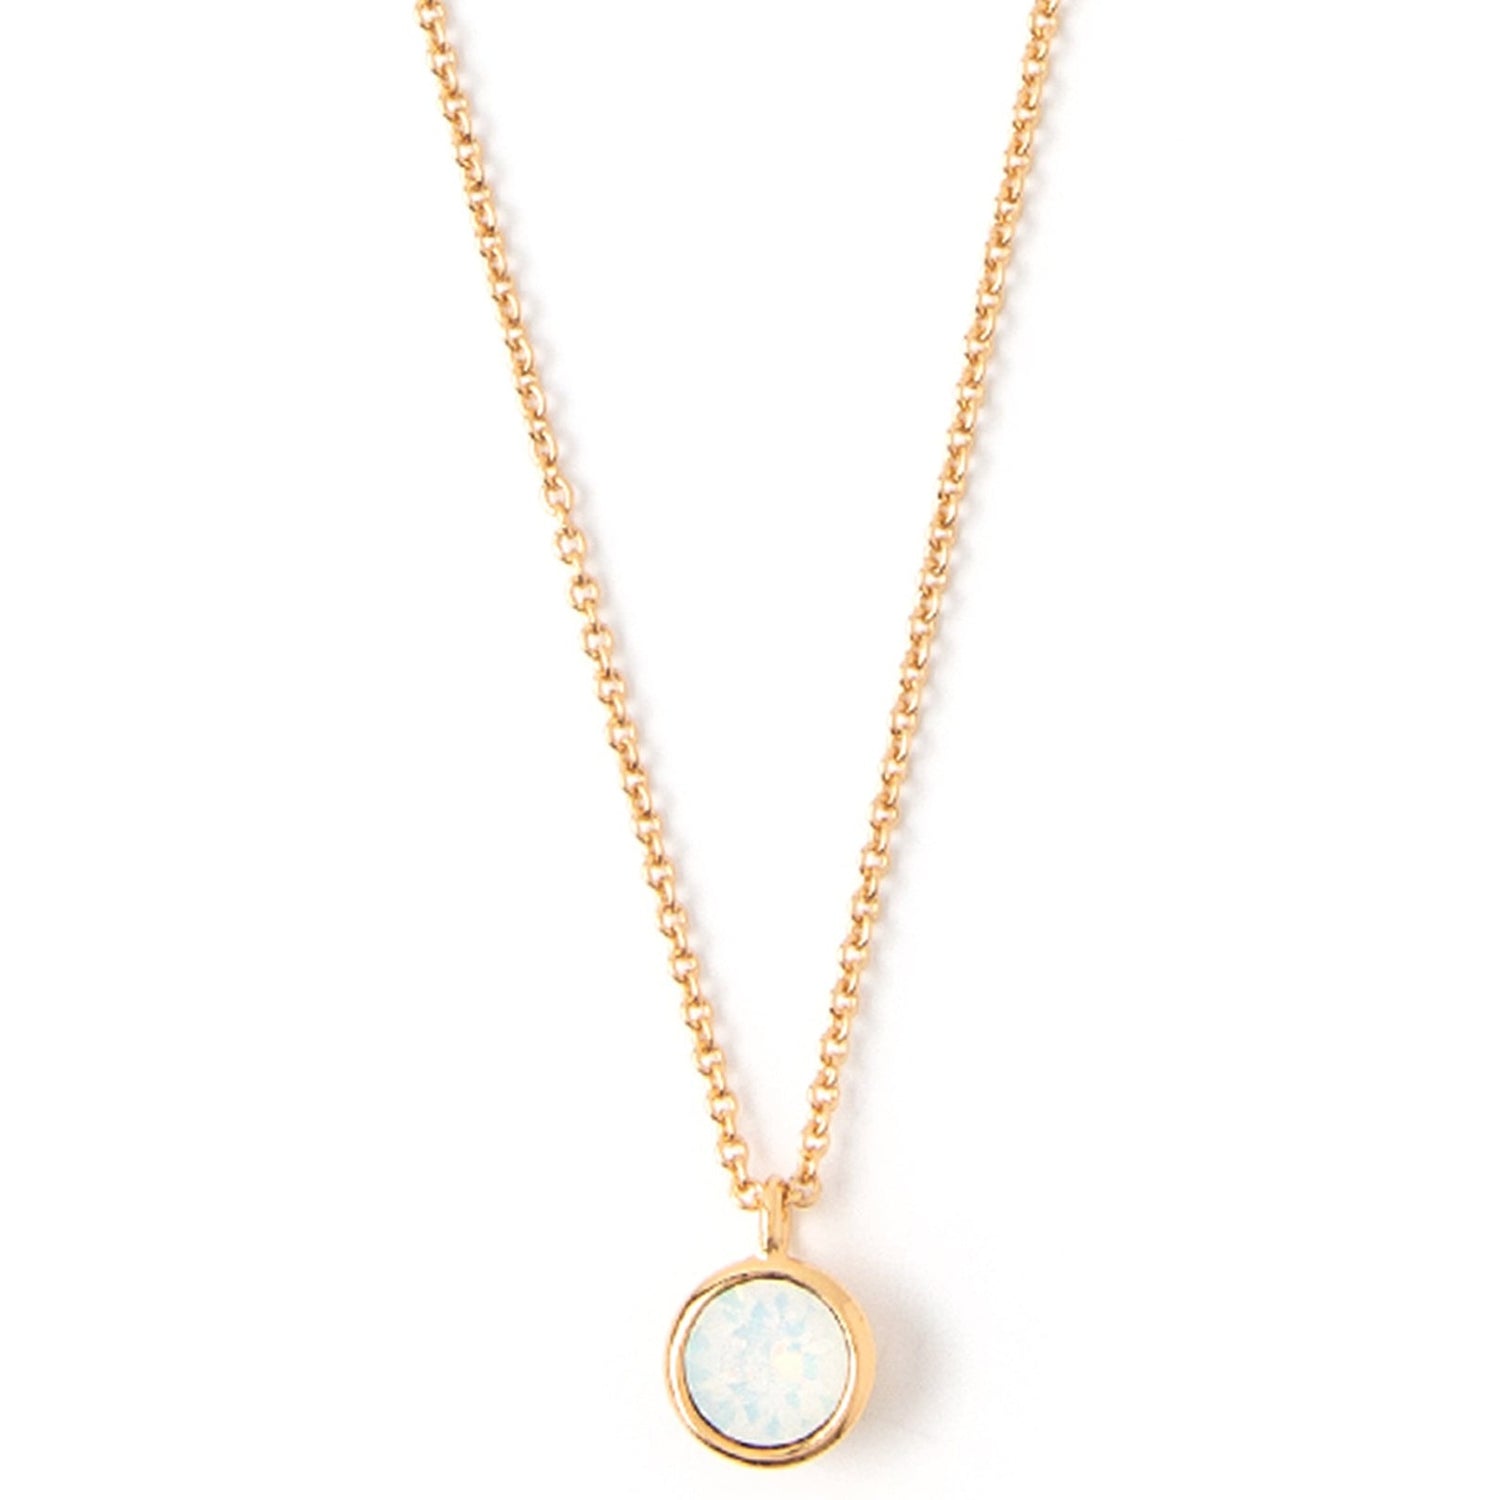 White Opal Necklace Made With Swarovski® Crystals - Gold